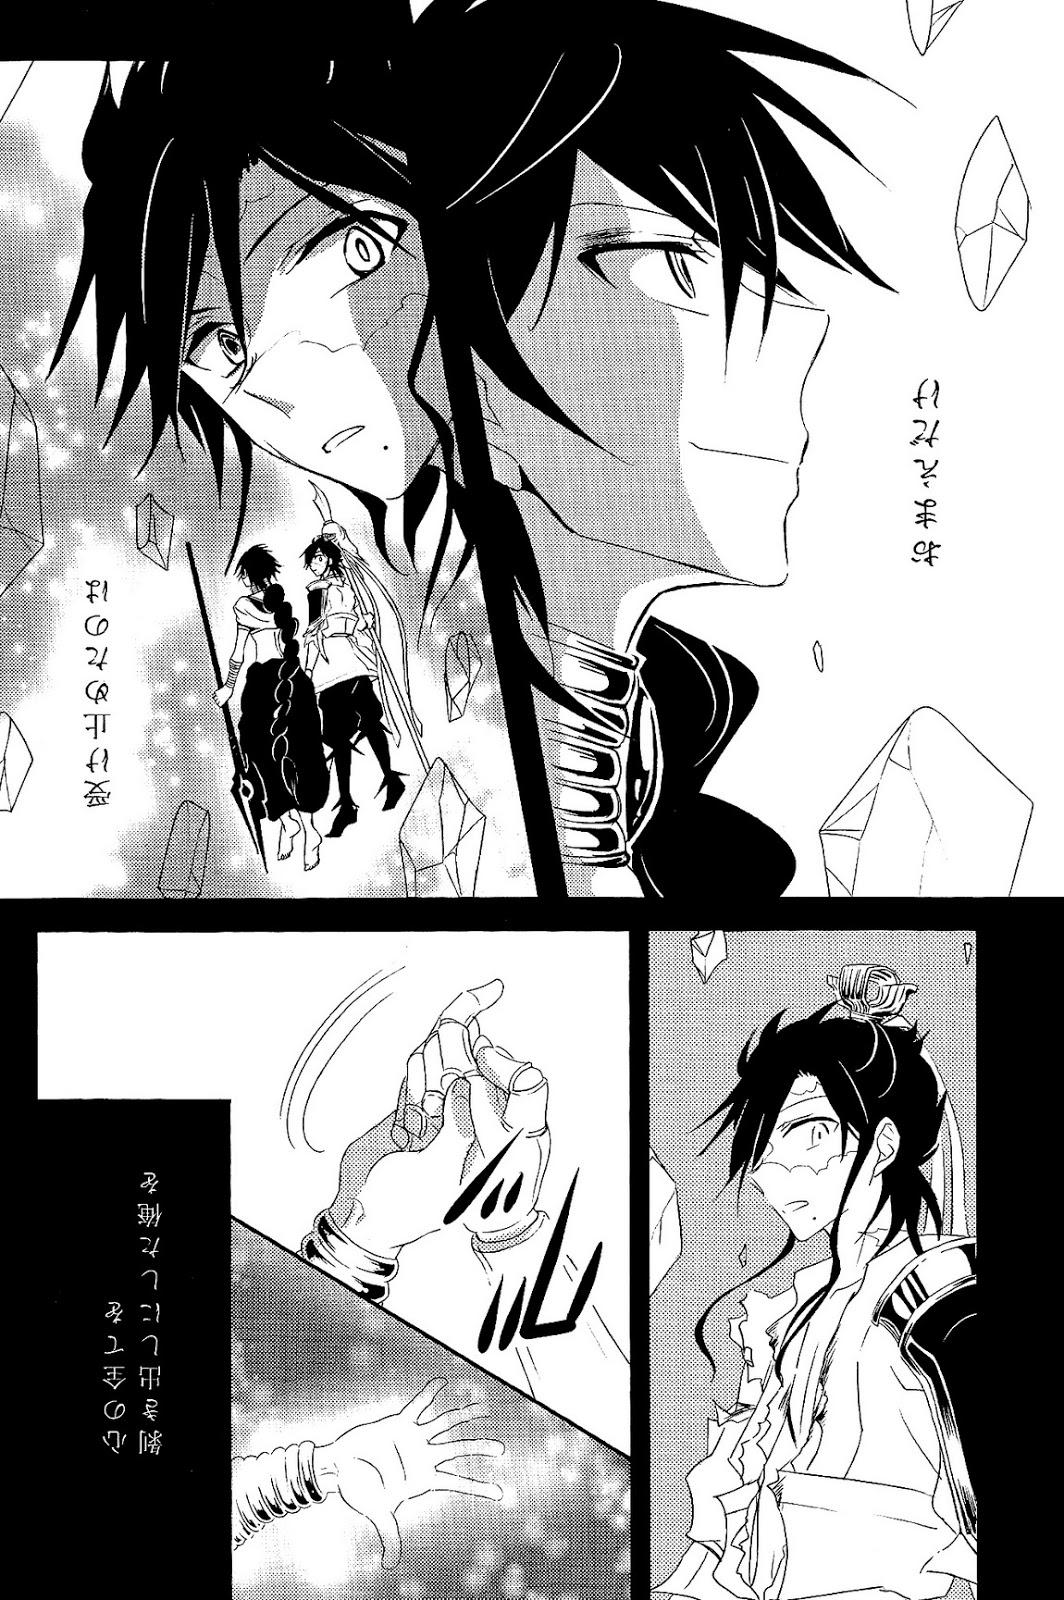 Girls One after another ―Are Ato ni Saku Hana― - Magi the labyrinth of magic Alternative - Page 4